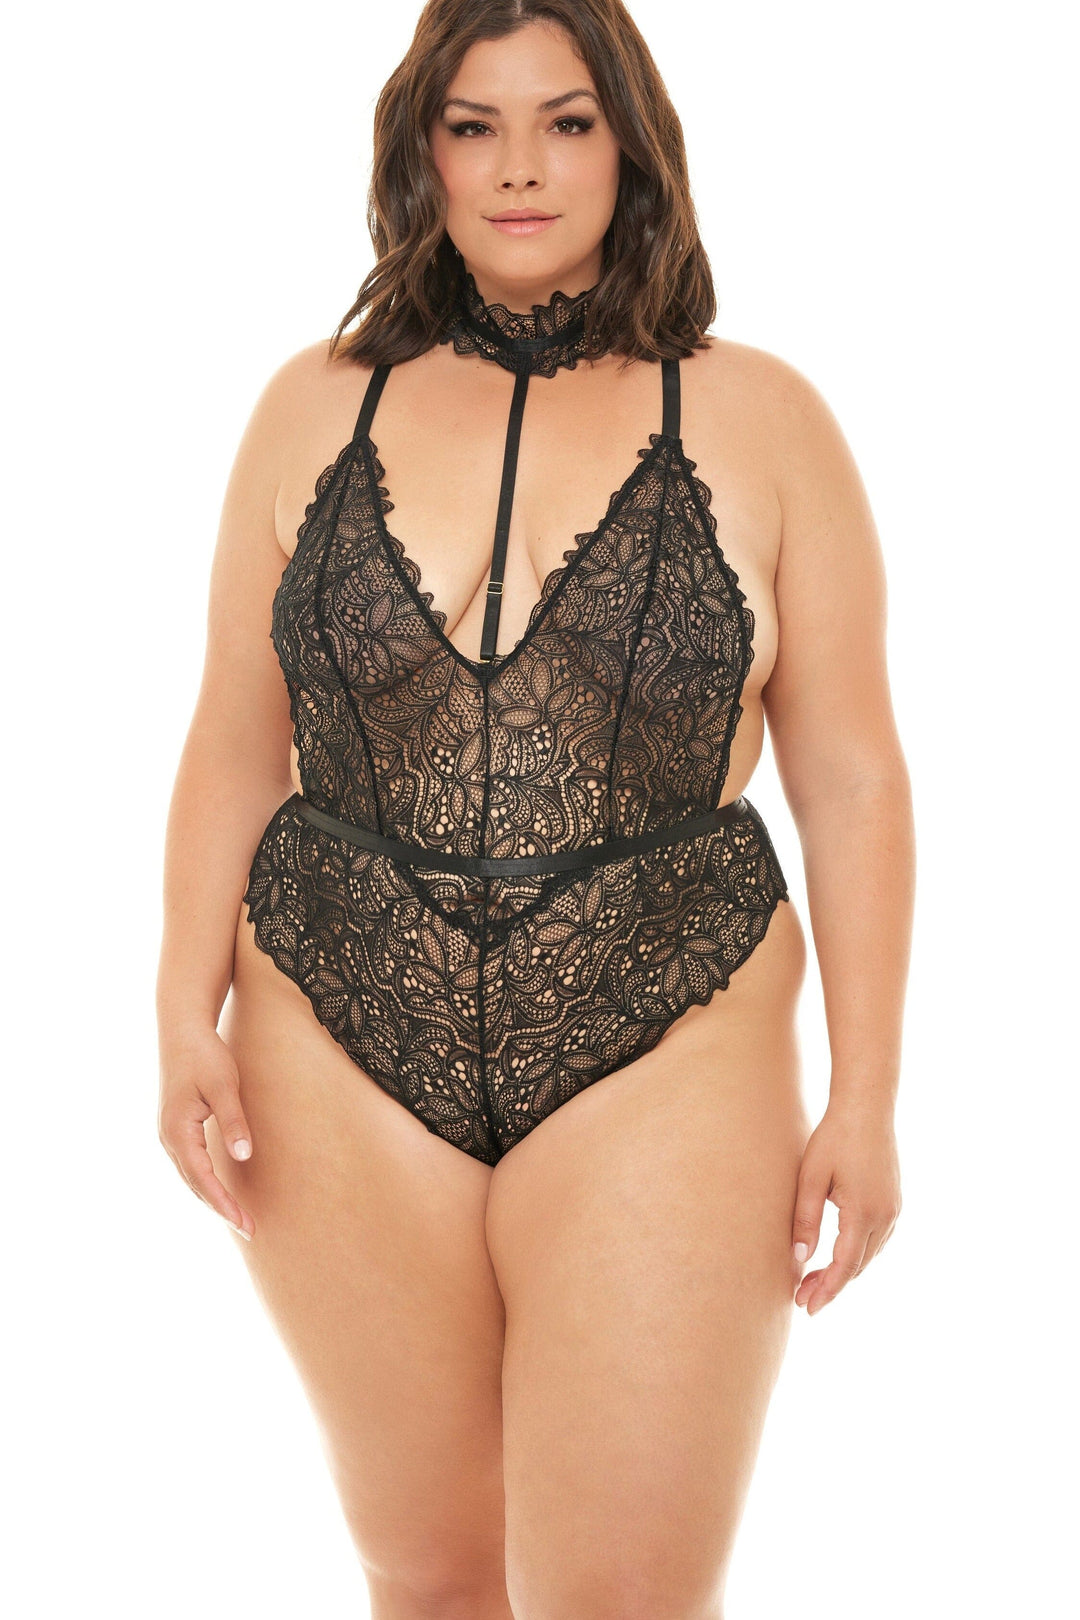 Lace Deep Plunge Teddy With Open Back And Harness Collar Detailing-Teddies-Oh La La Cheri-Black-3X/4X-SEXYSHOES.COM